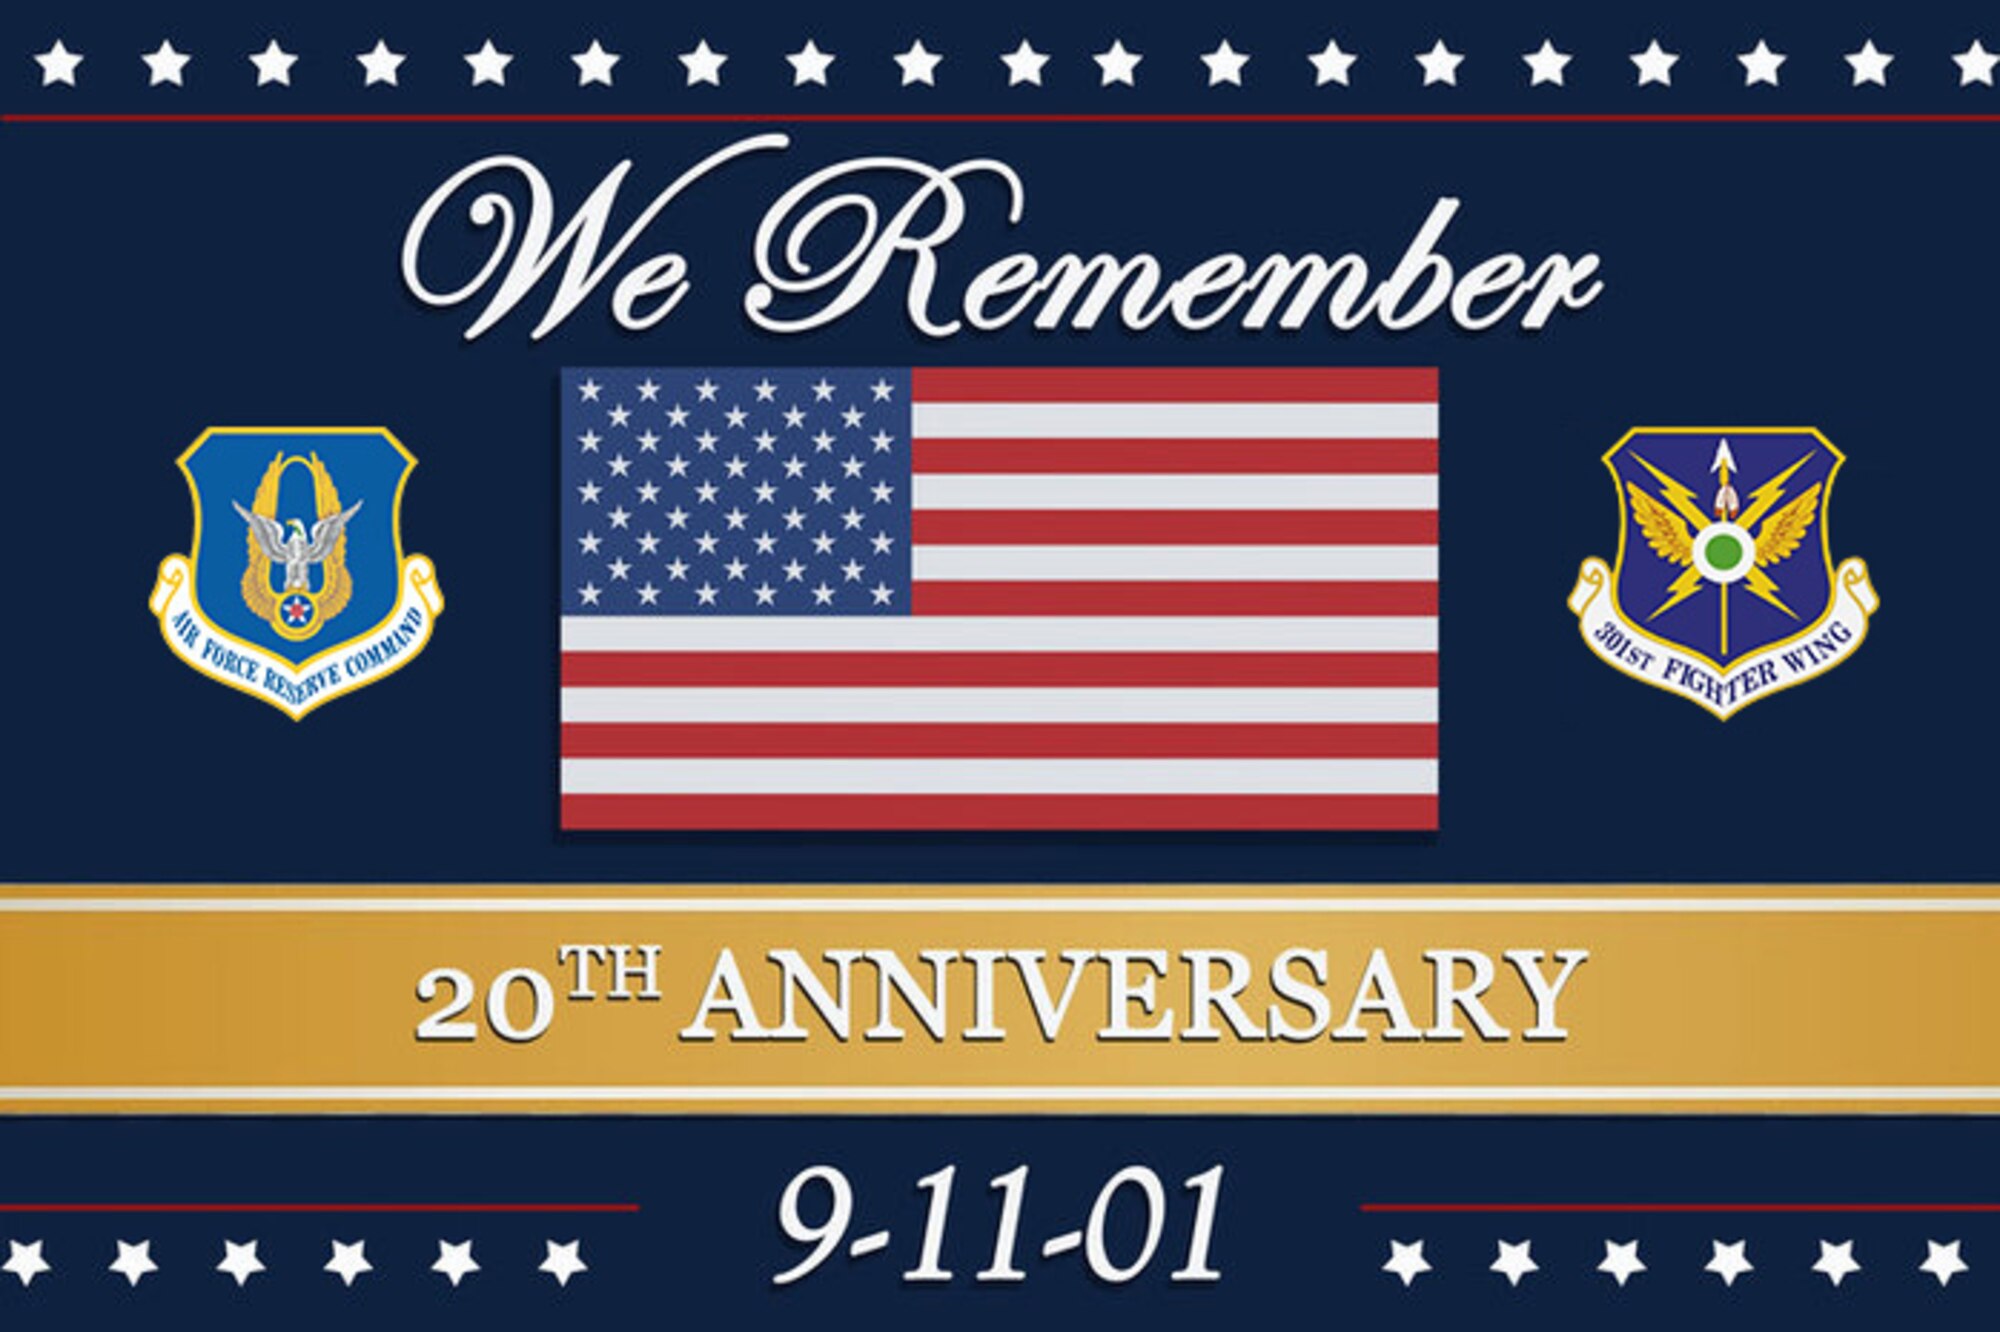 September 11th - 20th Anniversary (U.S. Air Force graphic by Capt. Jessica Gross)